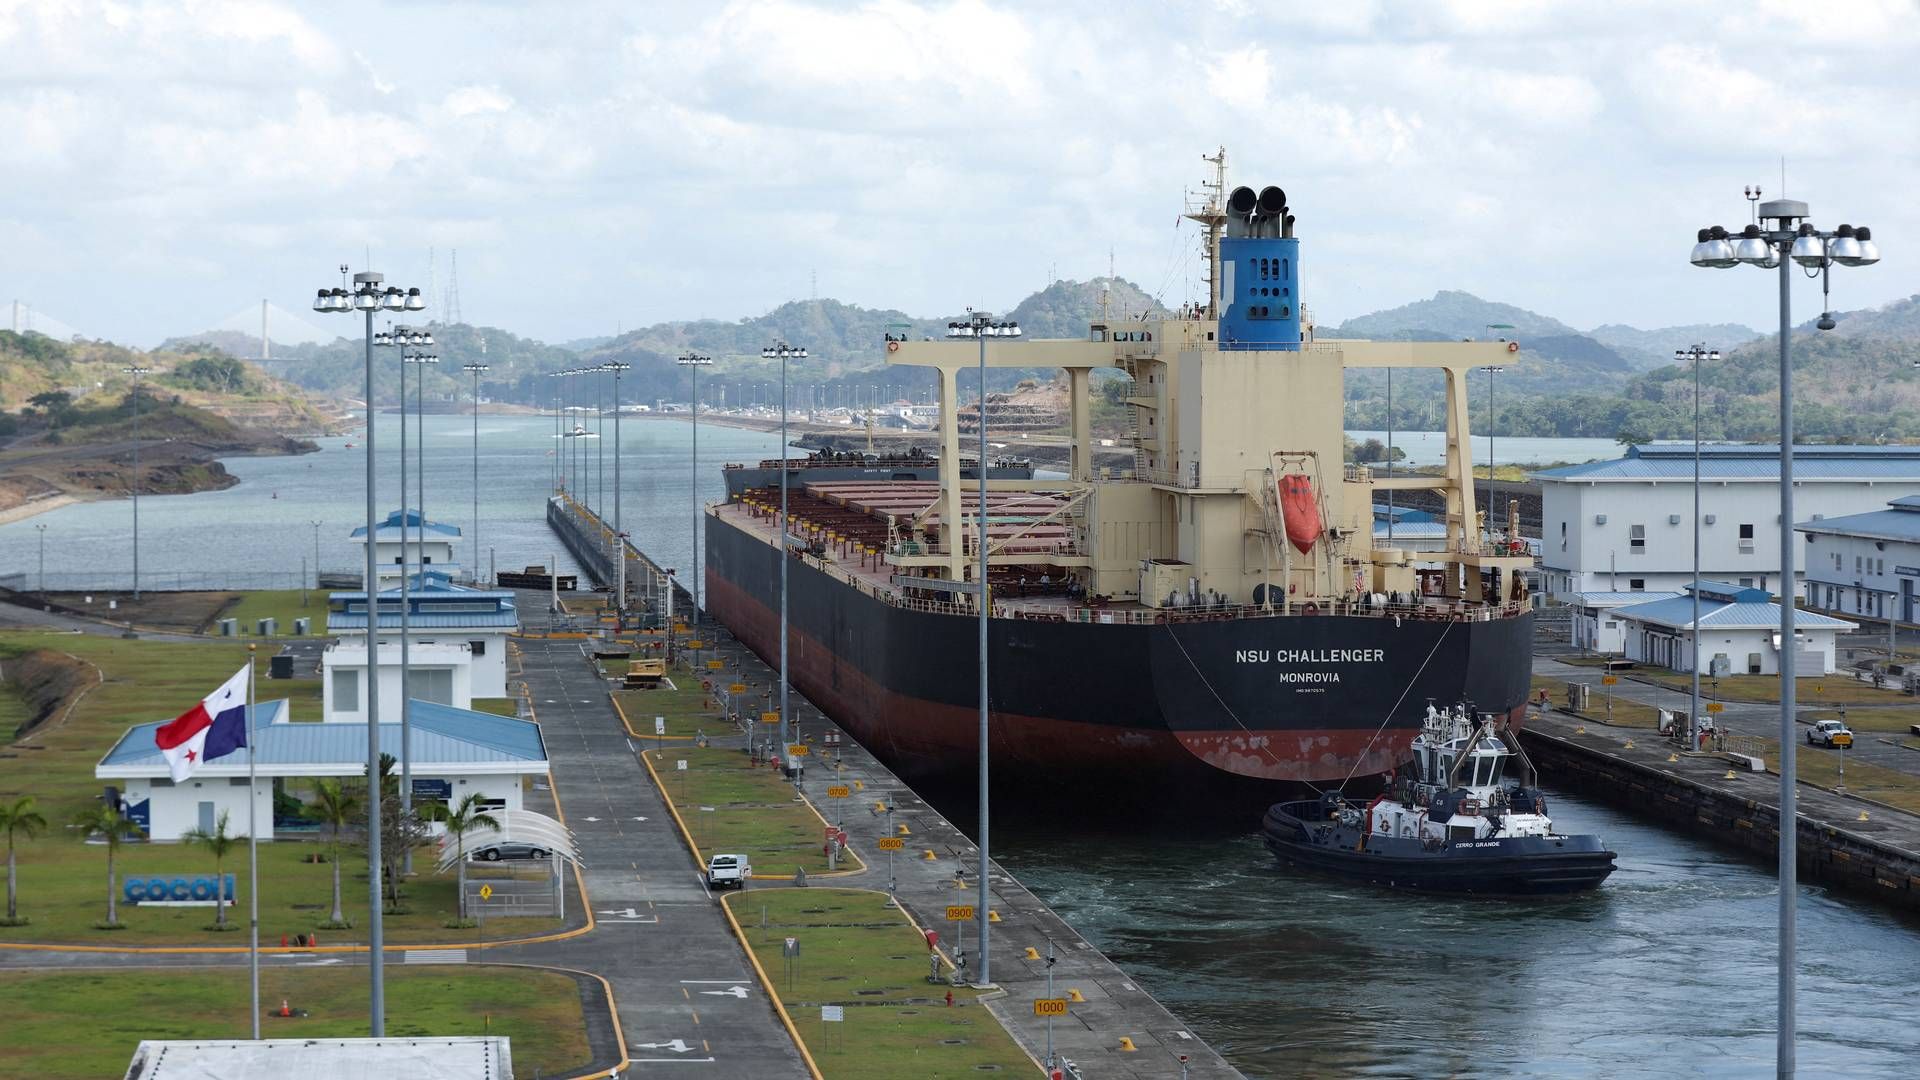 Last week, reports stated that a shipping company had paid more than DKK 30m (USD 4.36m) to jump the queue at the Panama Canal. | Photo: Aris Martinez/Reuters/Ritzau Scanpix